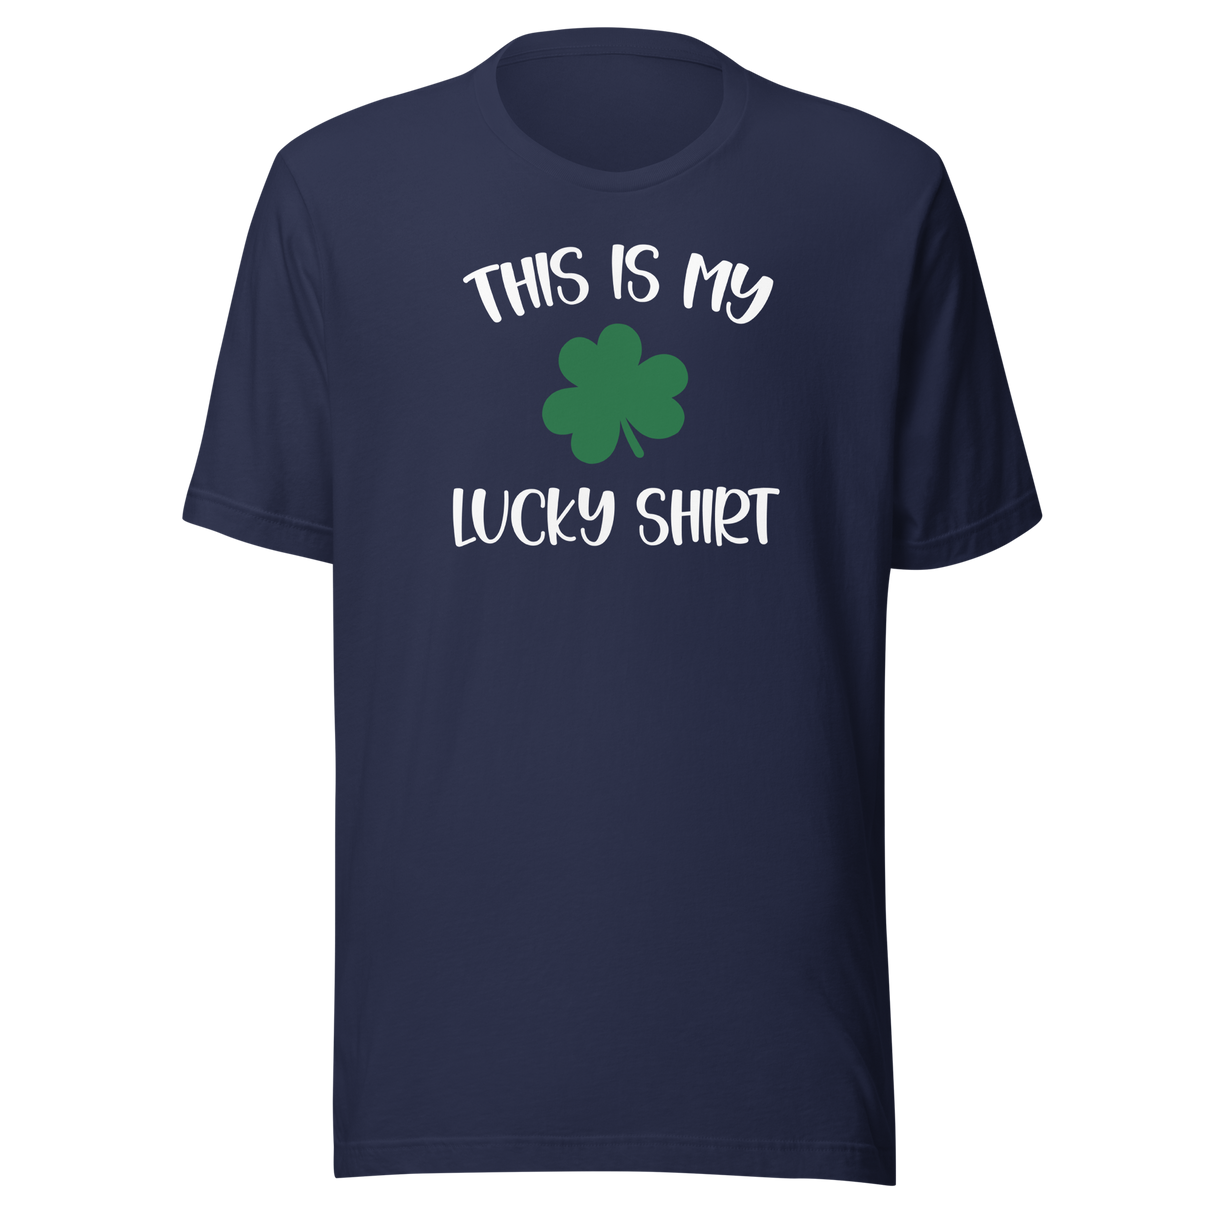 this-is-my-lucky-shirt-with-clover-leaf-holidays-tee-holiday-t-shirt-t-shirt-tee-lucky-t-shirt-clover-tee#color_navy